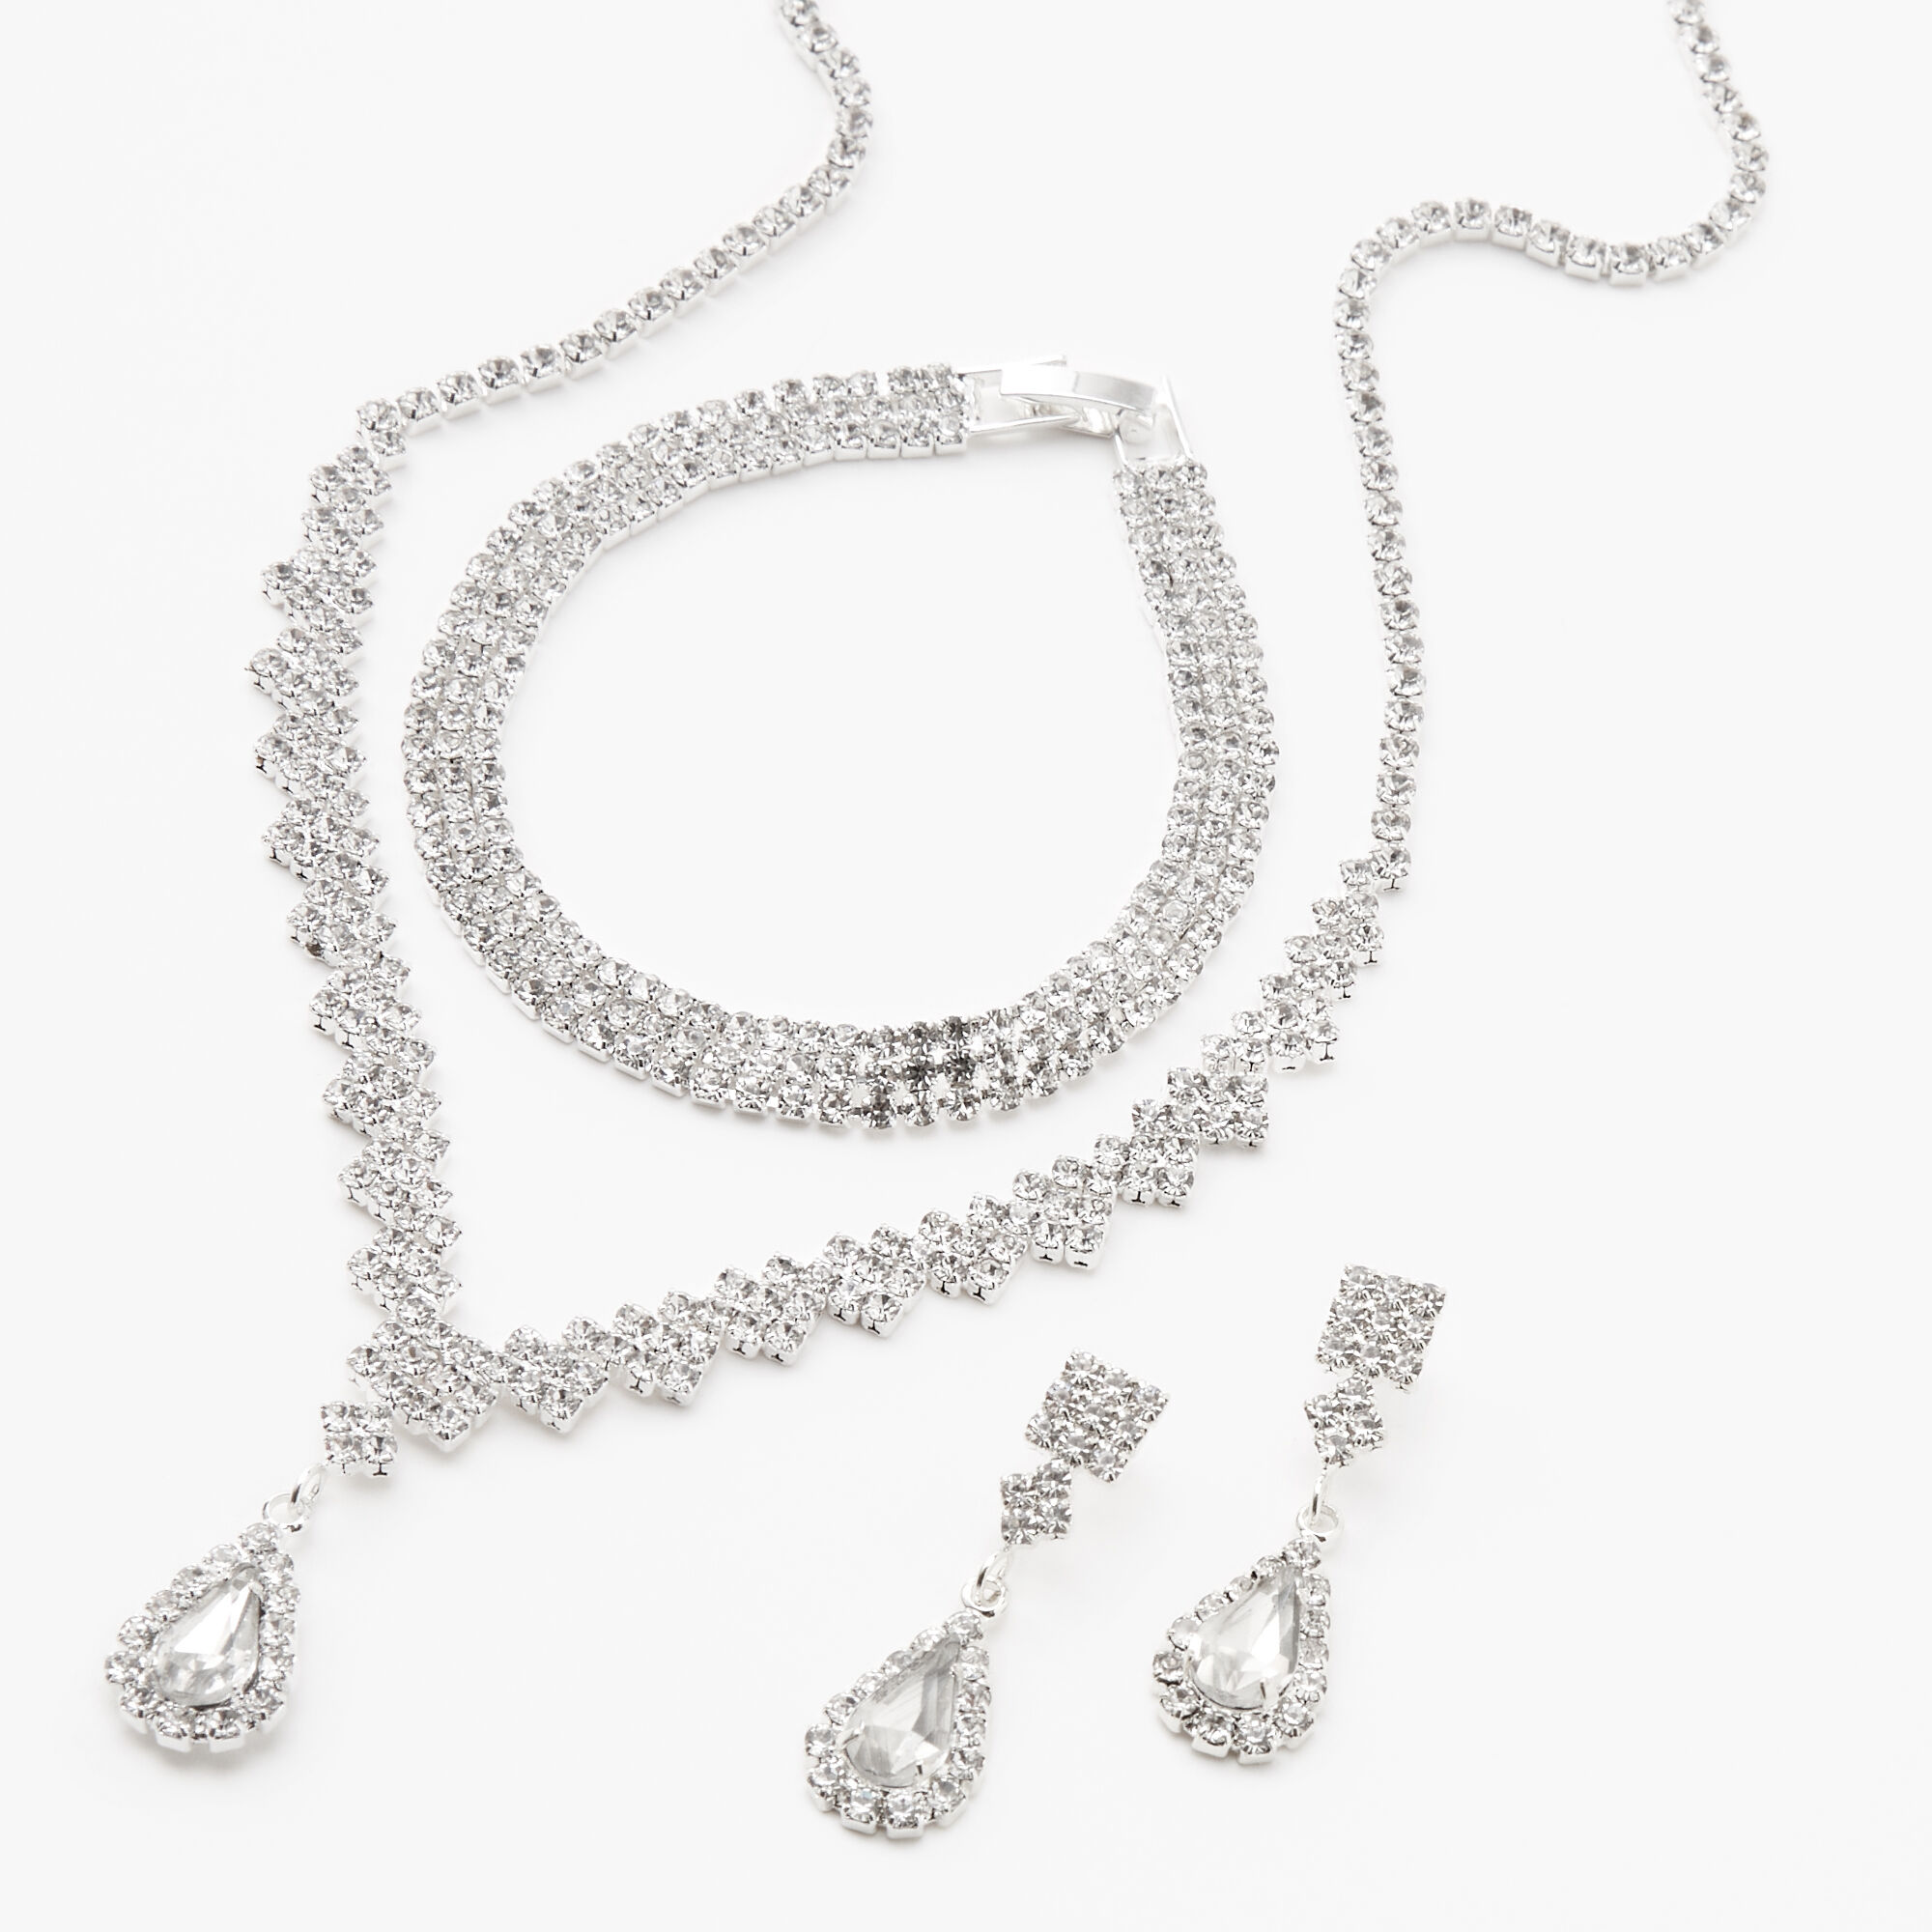 View Claires Tone Cubic Zirconia Teardrop Jewelry Set 3 Pack Silver information